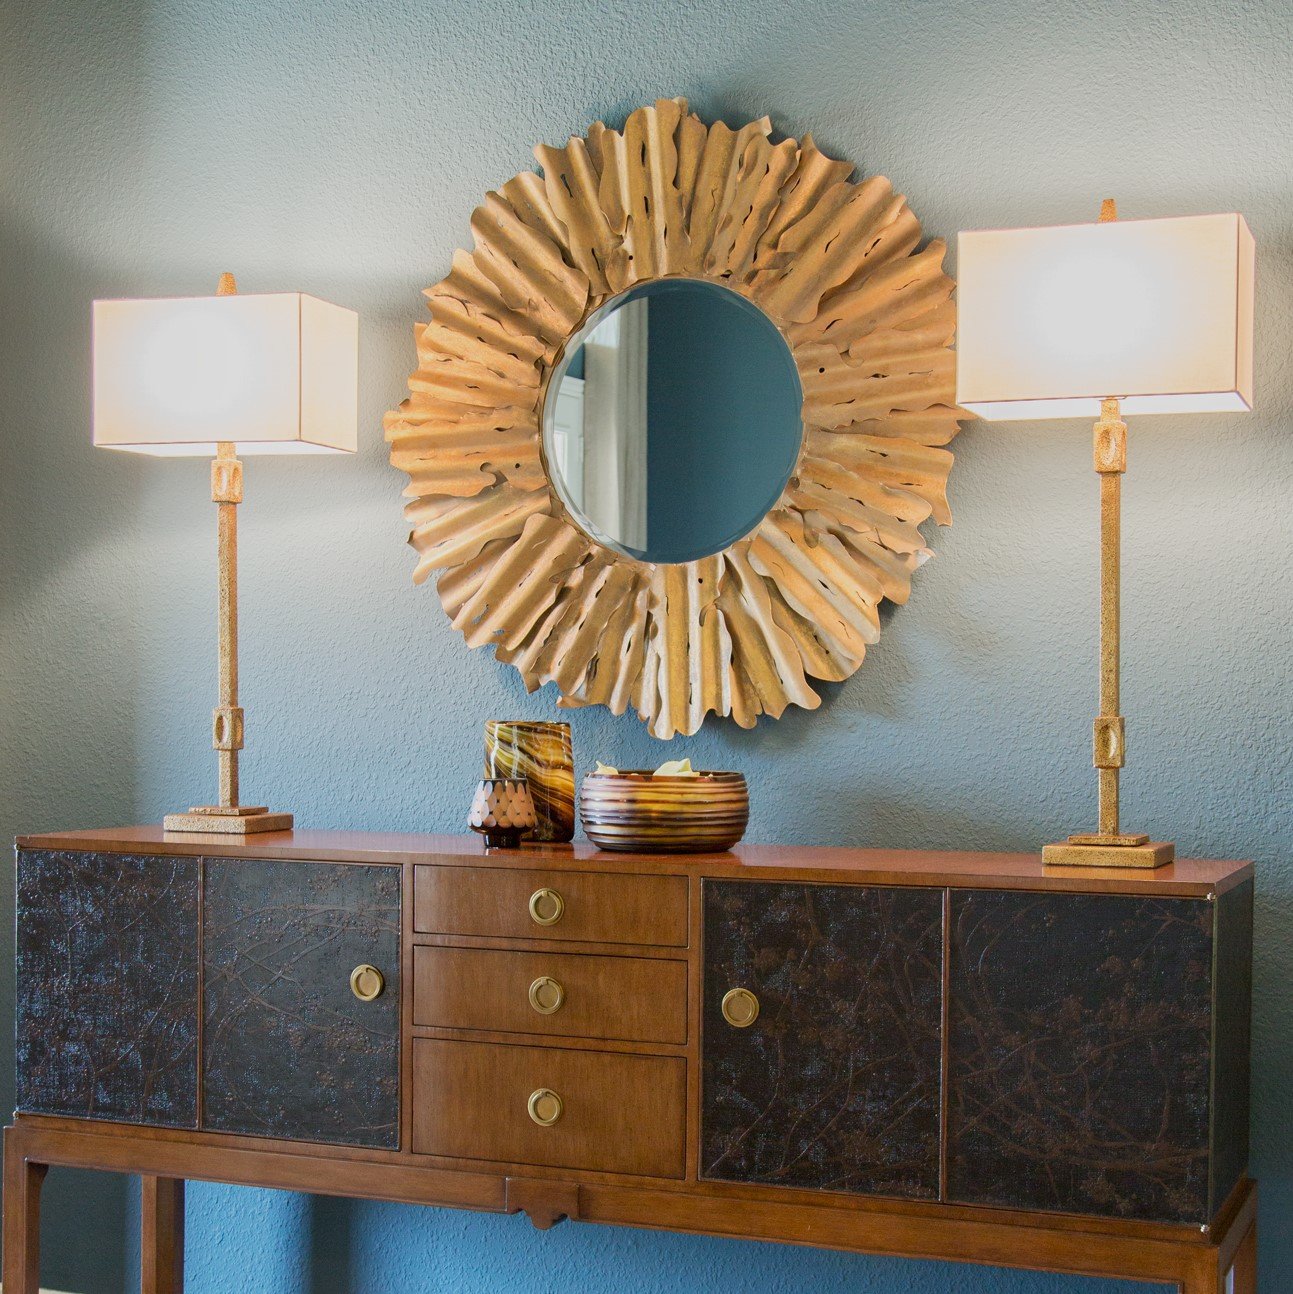 How to Decorate with a Round Mirror